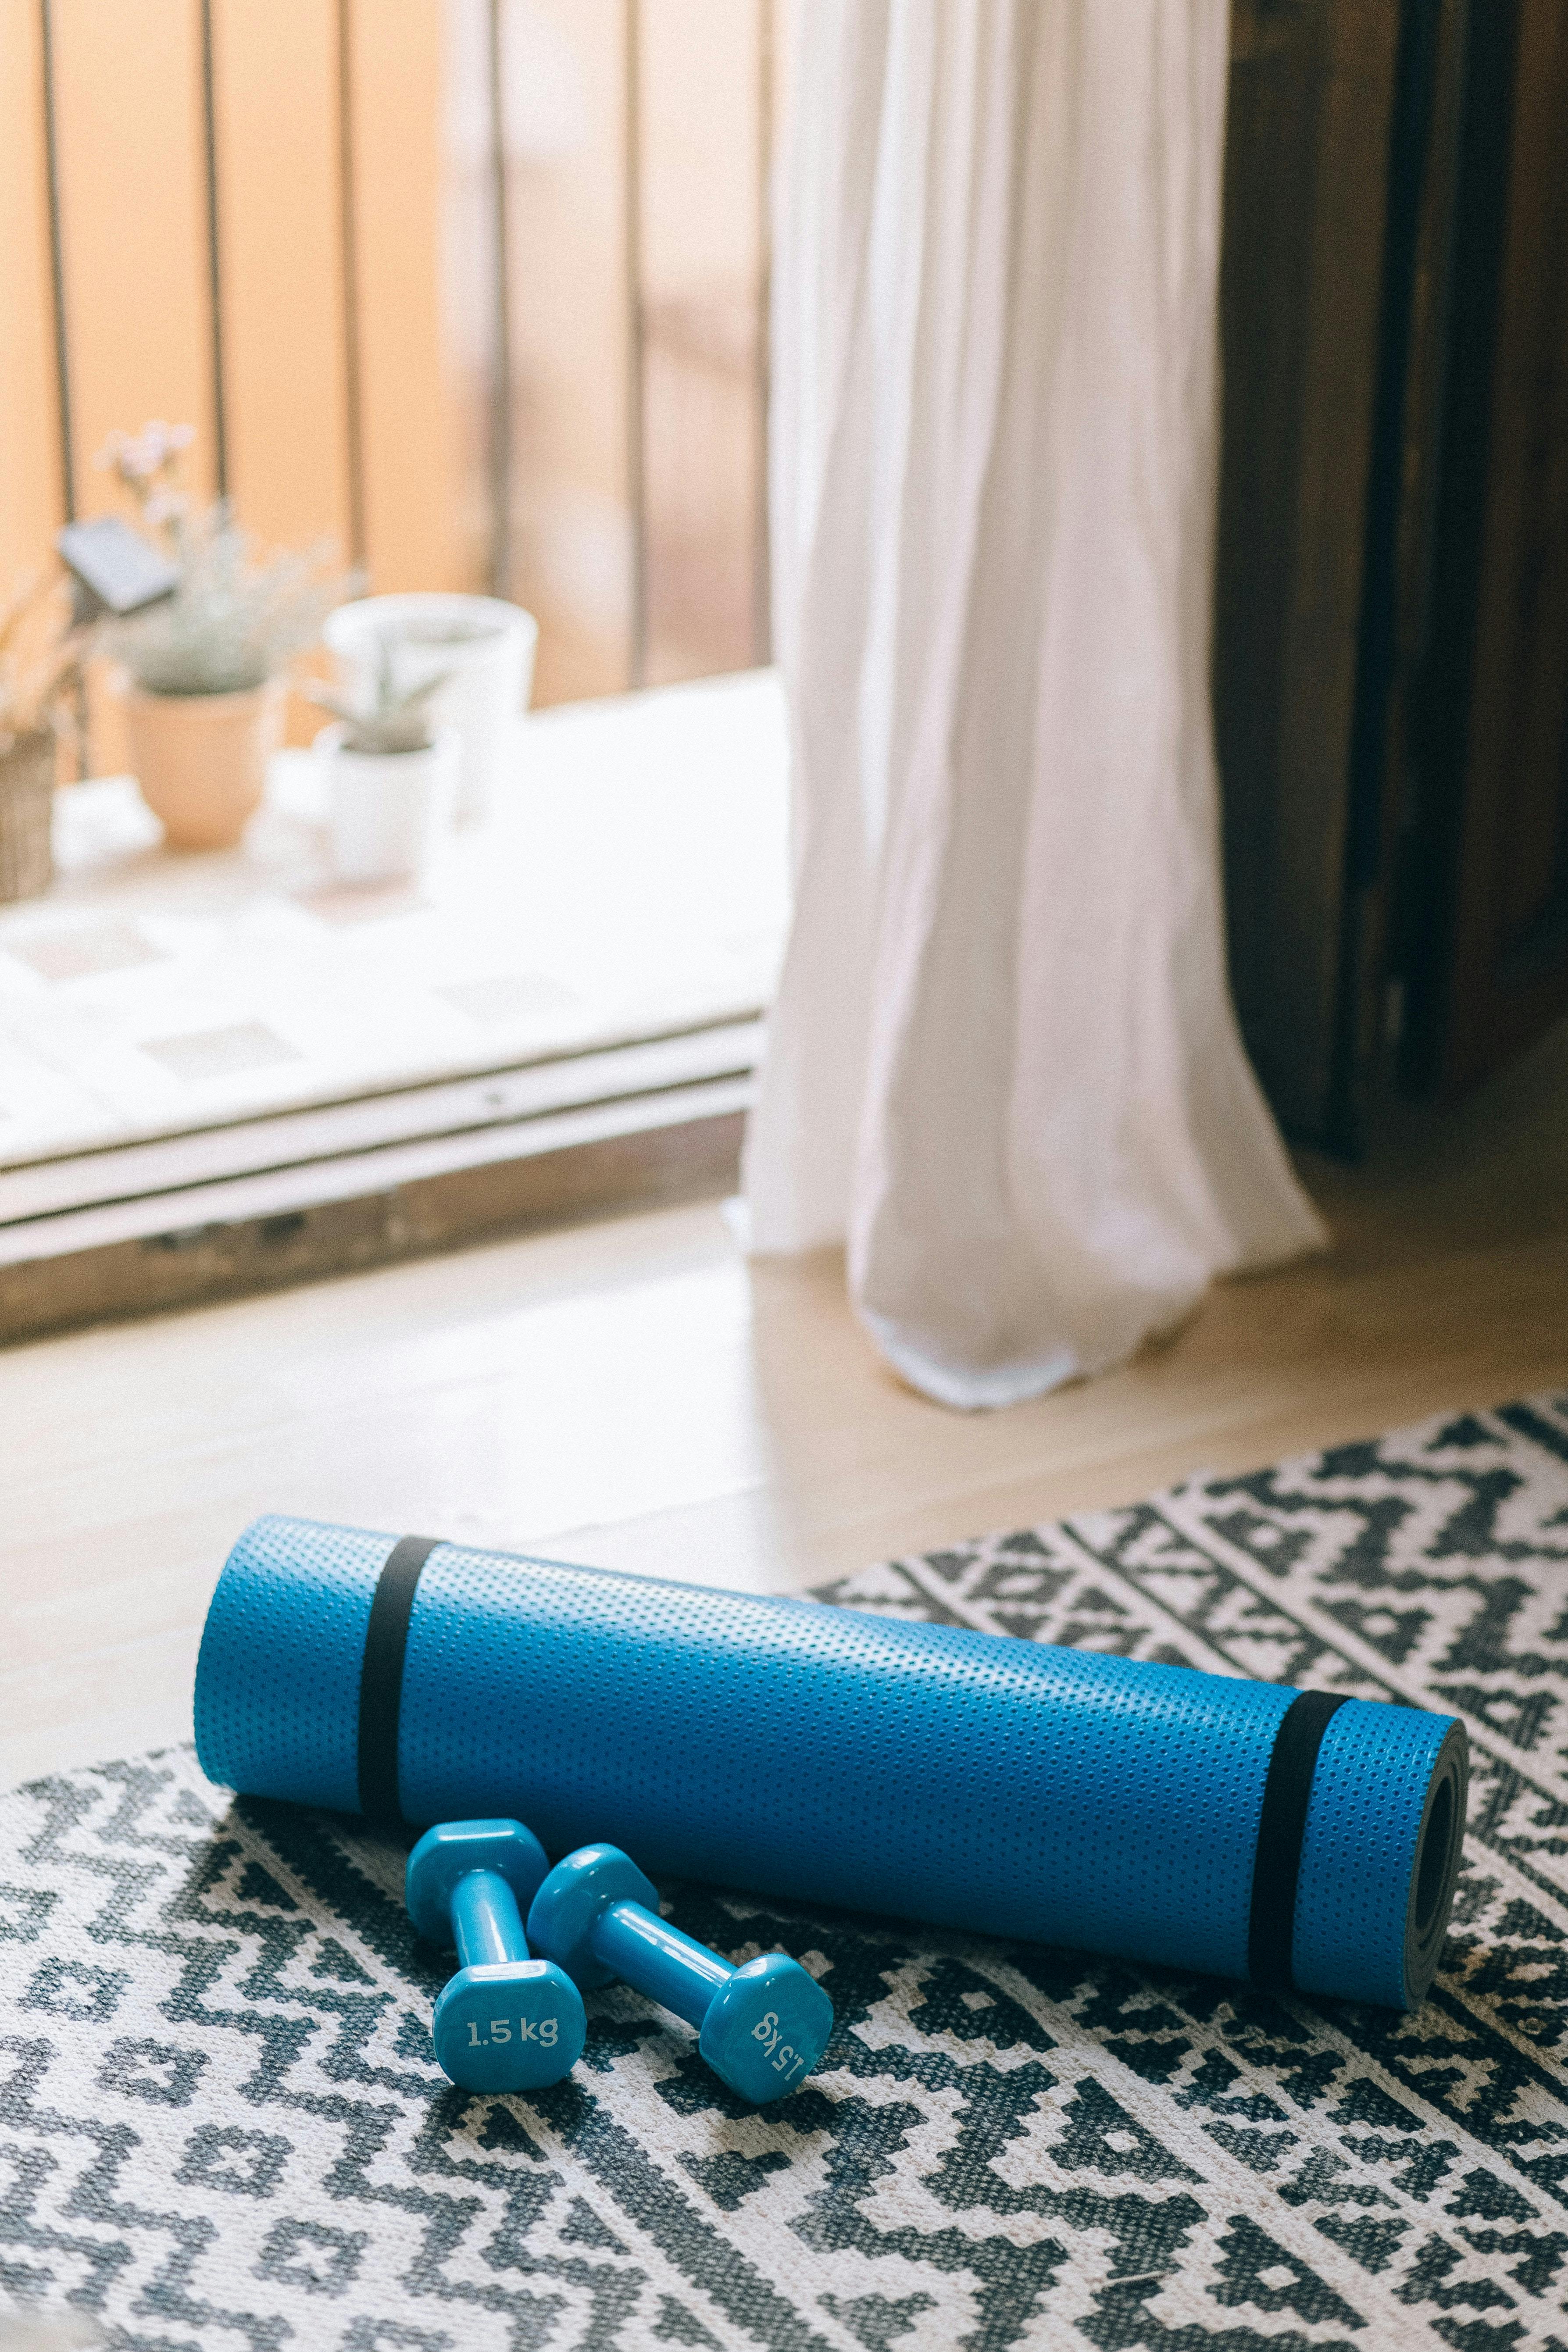 Two hand weights and a yoga mat laying on the ground indoors